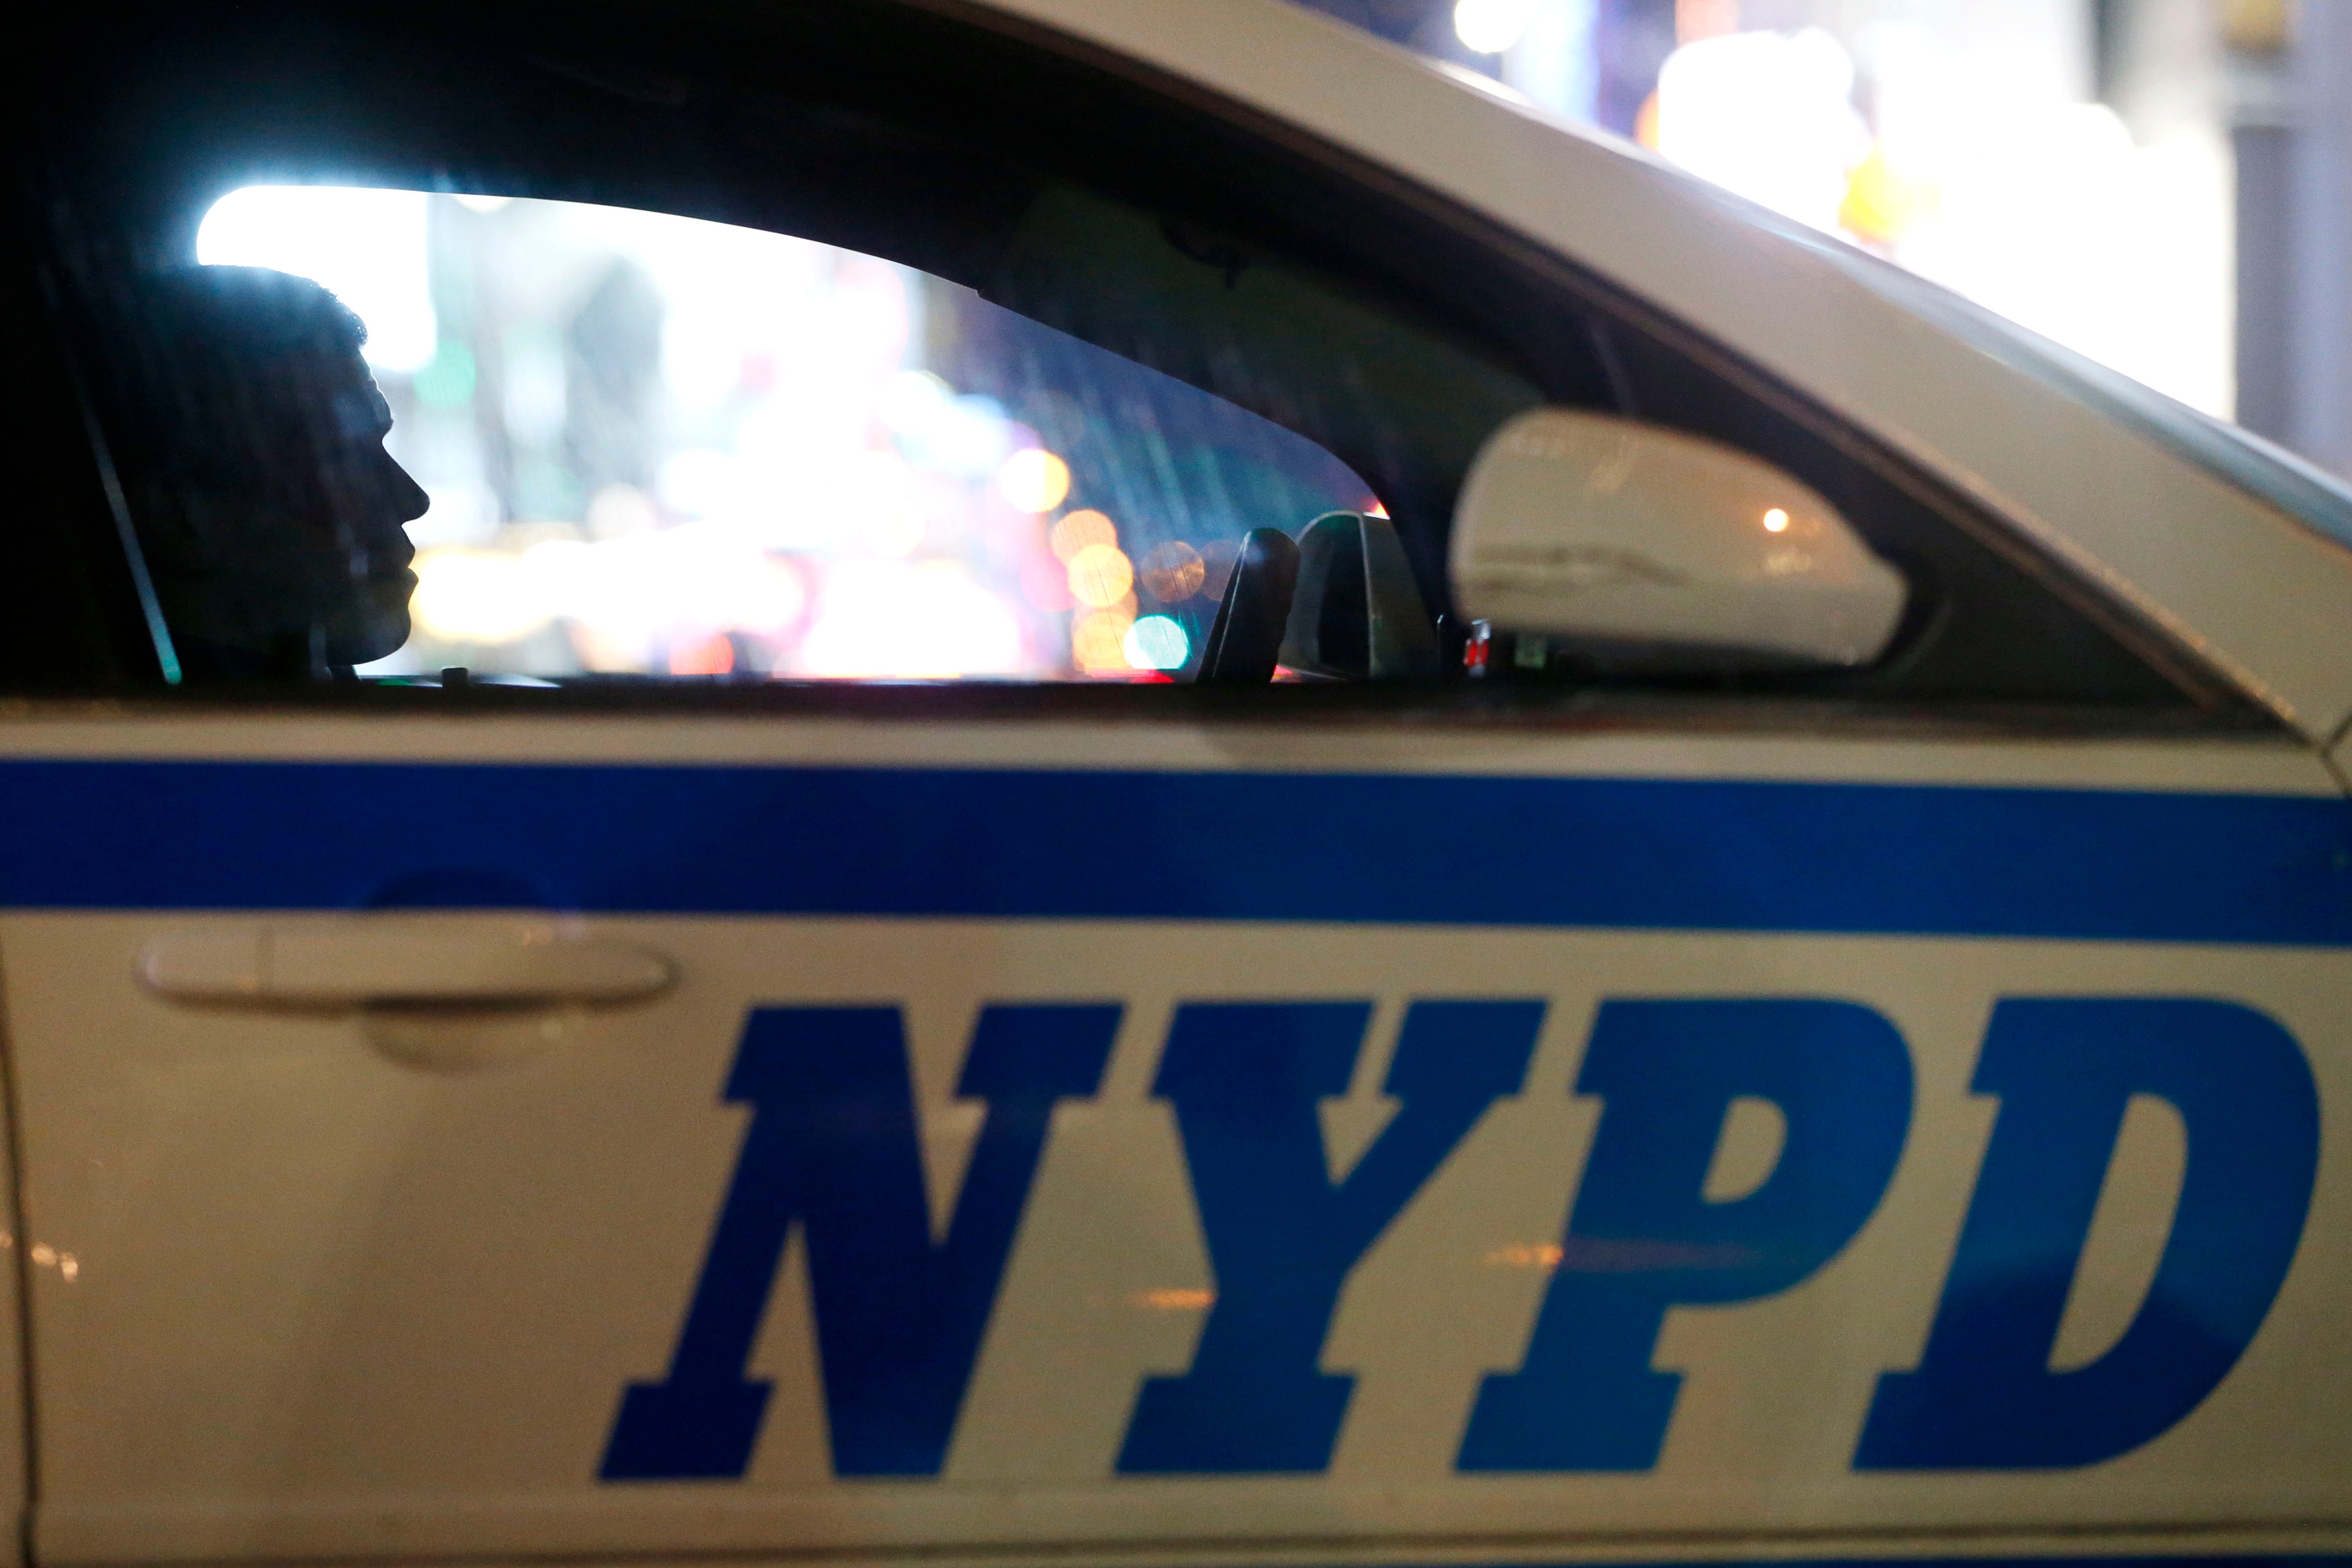 NYPD officers collected record $837M in overtime amid skyrocketing violent crime